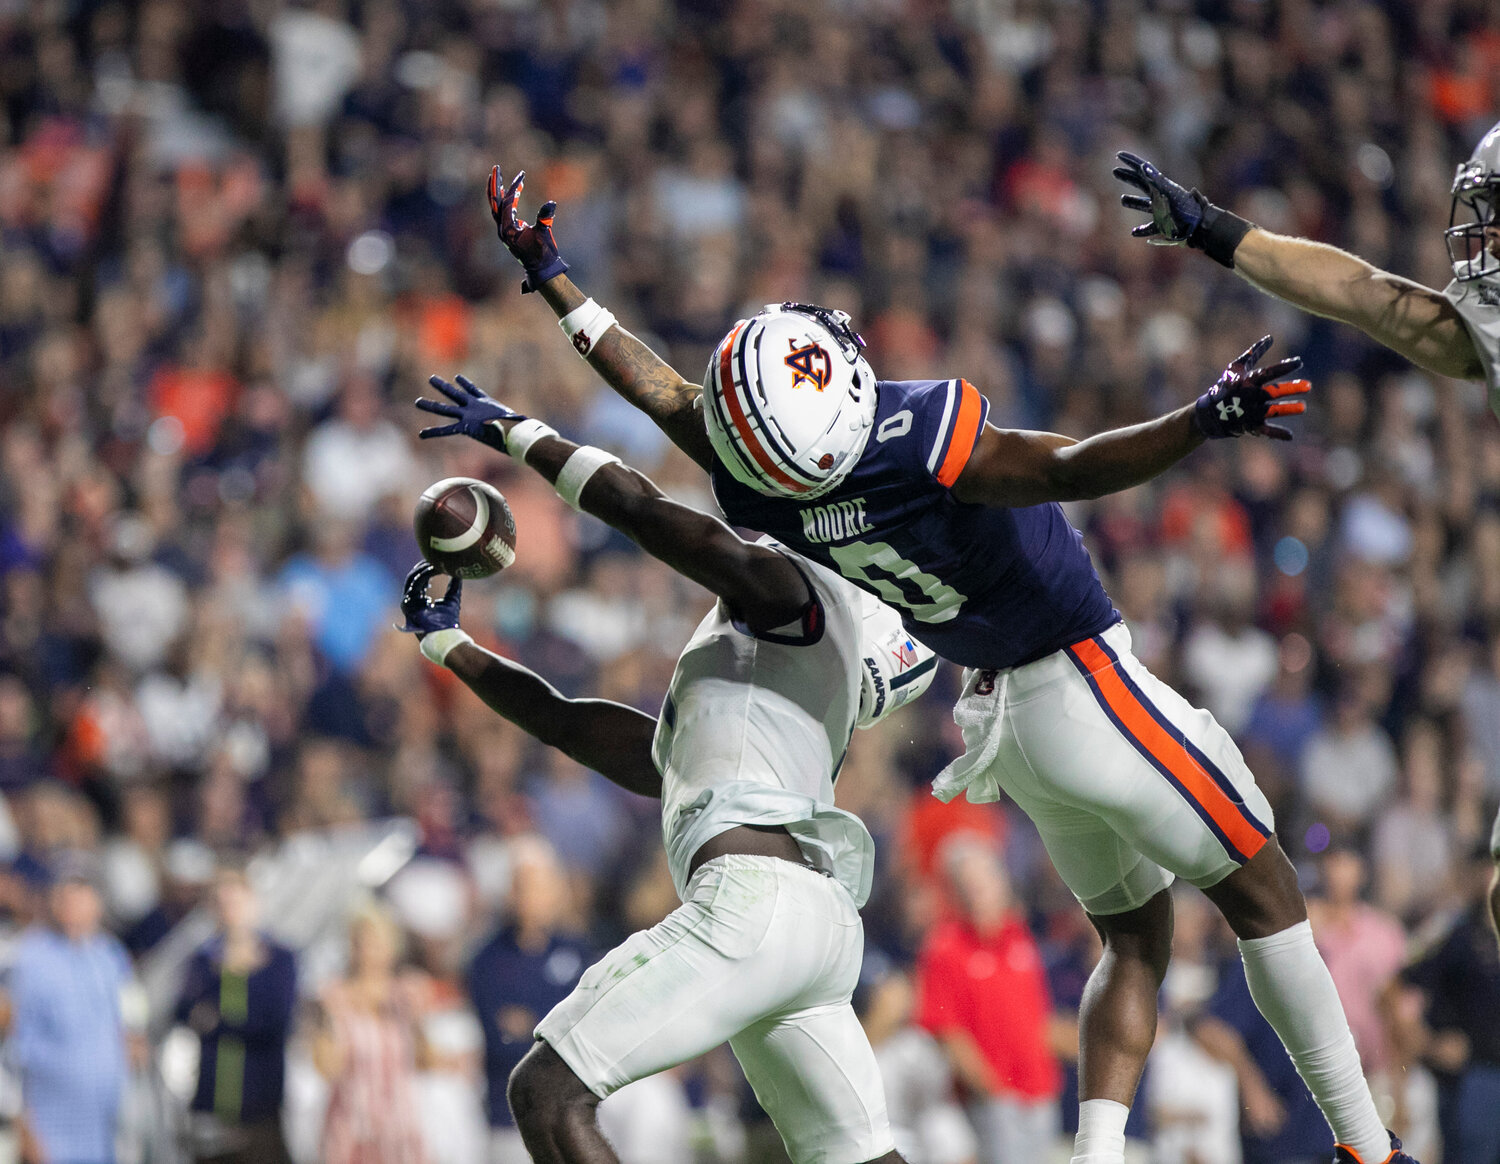 Samford junior Kourtlan Marsh comes down with an interception in the end zone during the Bulldogs’ game against the Auburn Tigers at Jordan-Hare Stadium Saturday night.